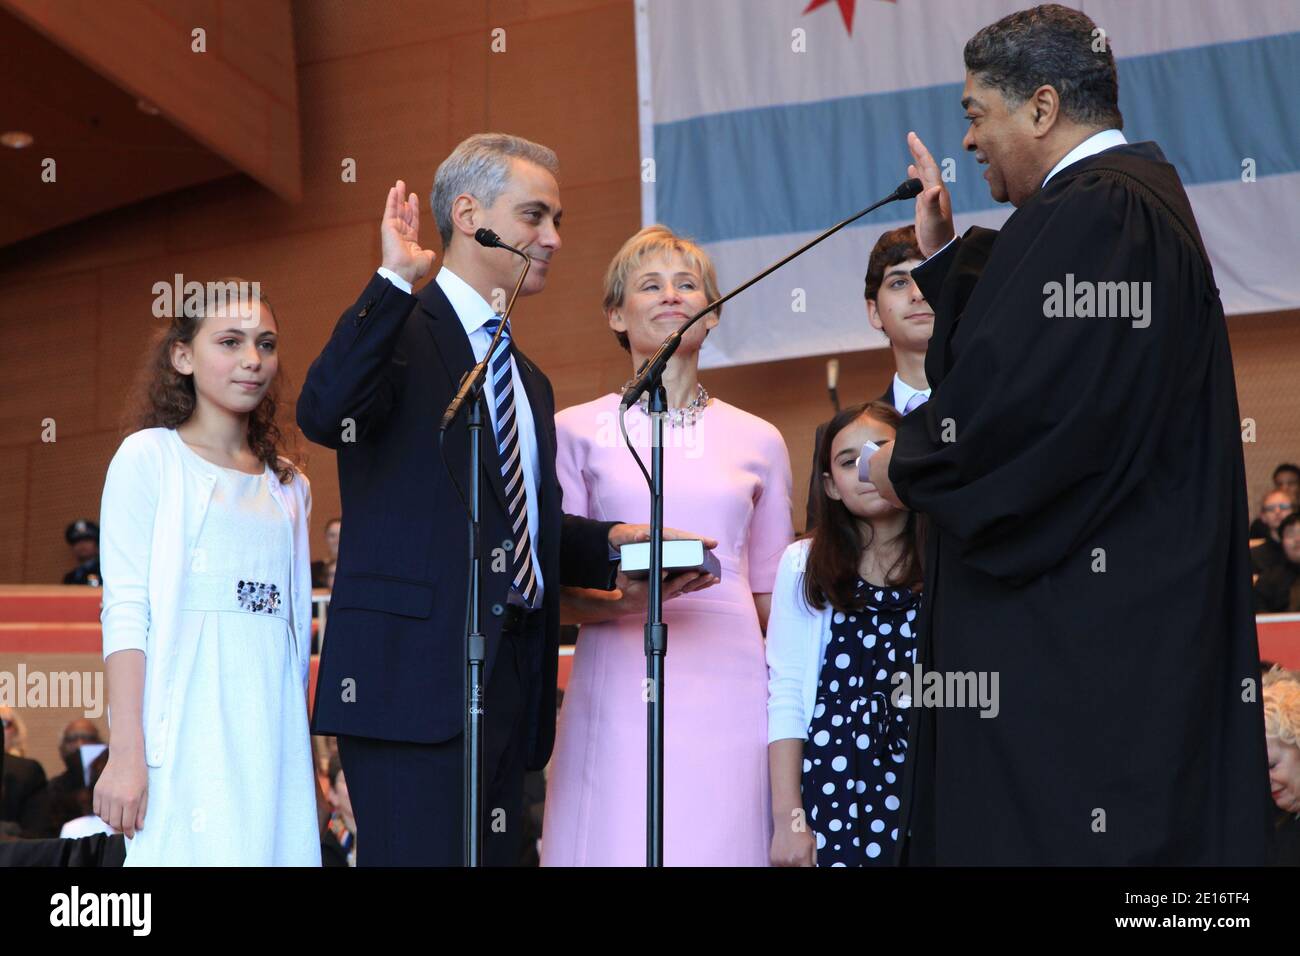 Mayor-elect Rahm Emanuel, wife Amy Rule Emanuel, children and Judge Timothy C. Evans on the stage for a swearing-in ceremony at Millenium Park in Chicago, Illinois on May 16, 2011. Photo by Alexandra Buxbaum/ABACAPRESS.COM Stock Photo